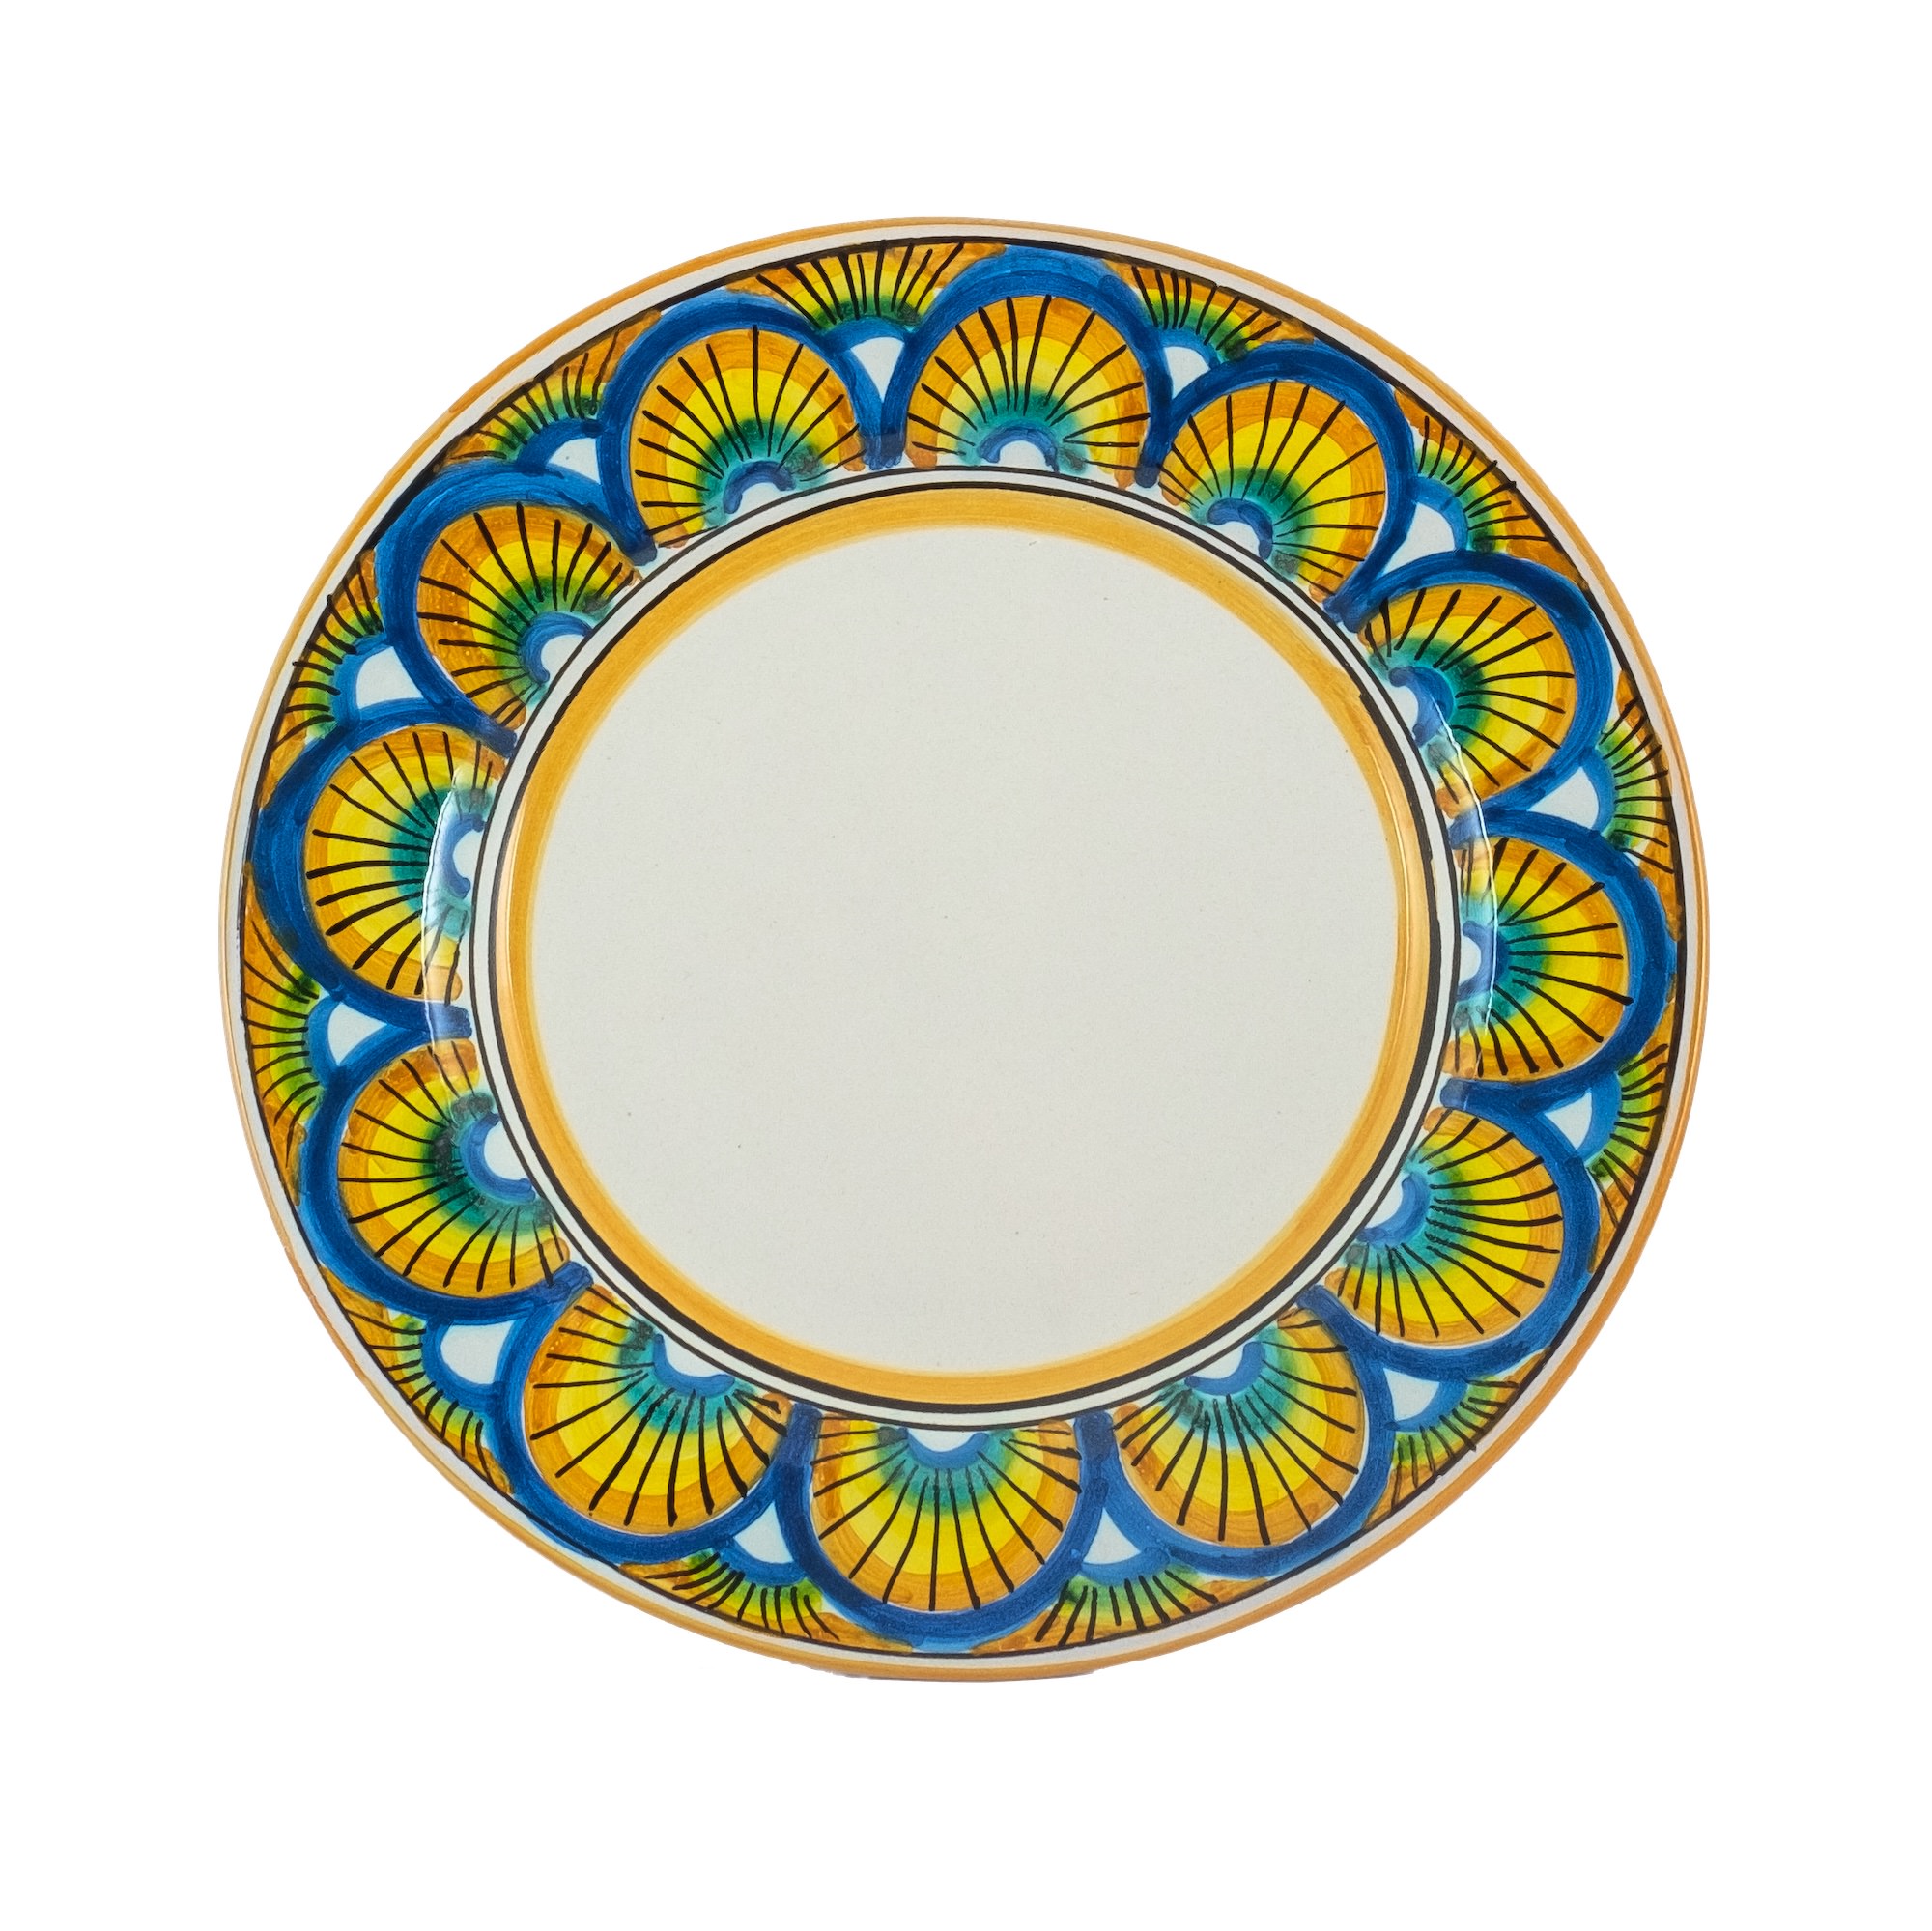 Collections dishes Ego the yellow Montedoro. Caltagirone - Sicilia